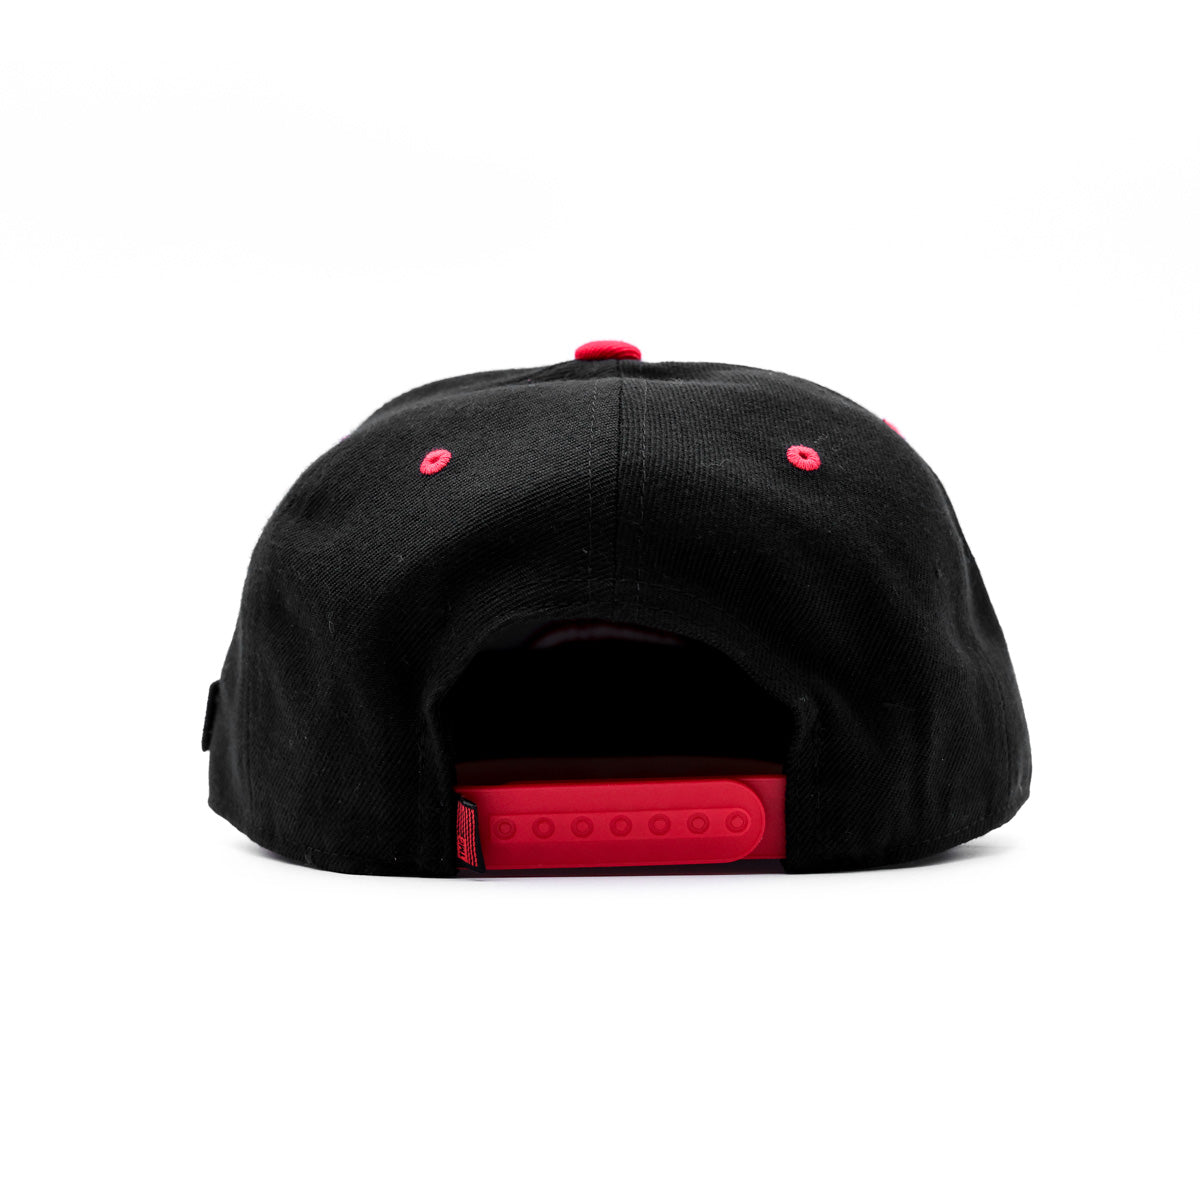 Crenshaw Limited Edition Snapback - Black/Red [Two-Tone] - Back